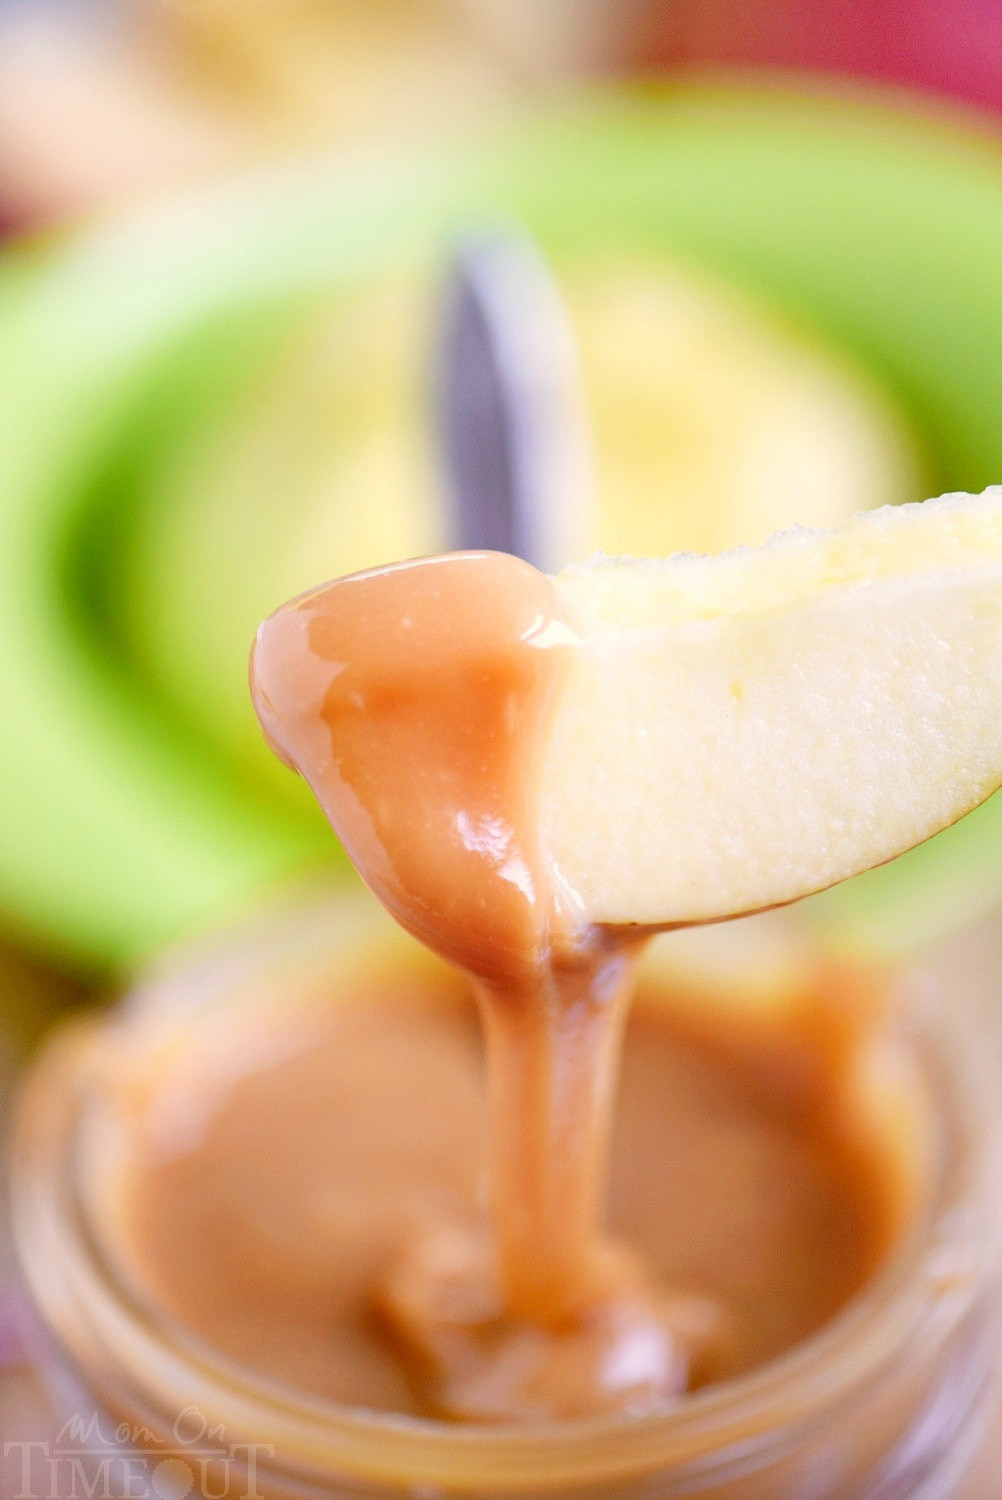 Caramel For Dipping Apples
 Easy Caramel Apple Dip Just 3 Ingre nts Mom Timeout